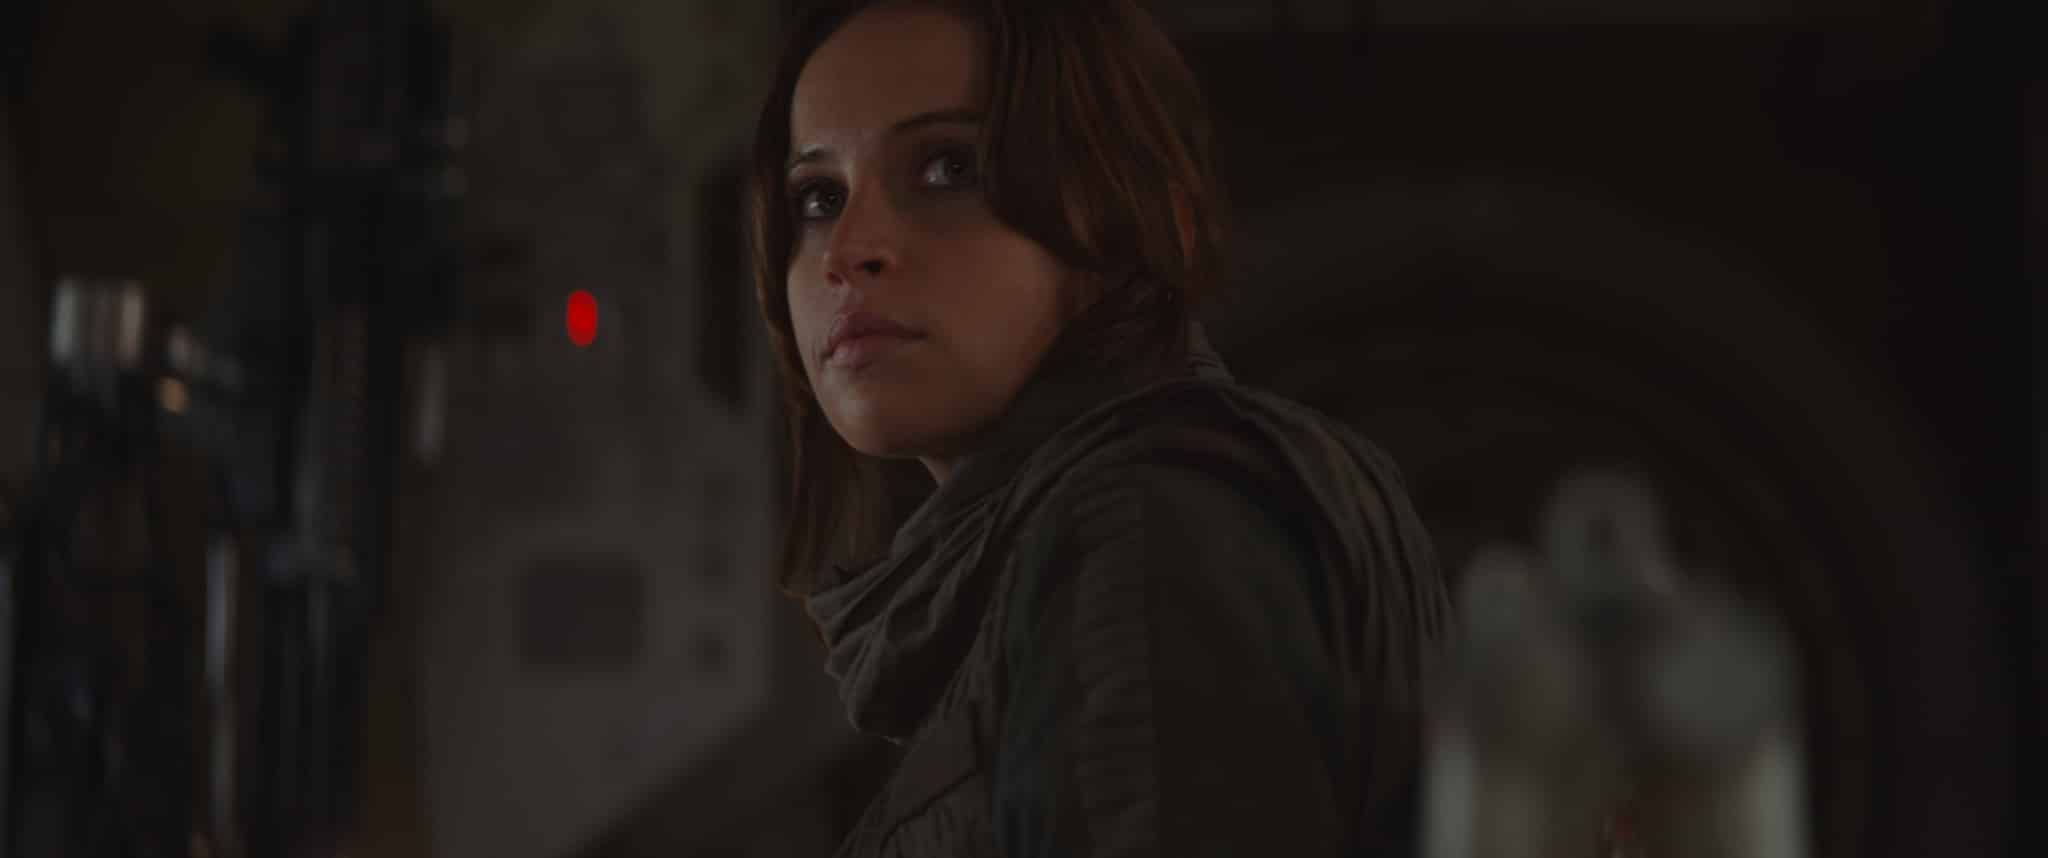 NEW Trailer for Rogue One: A Star Wars Story #RogueOne | ThisNThatwithOlivia.com